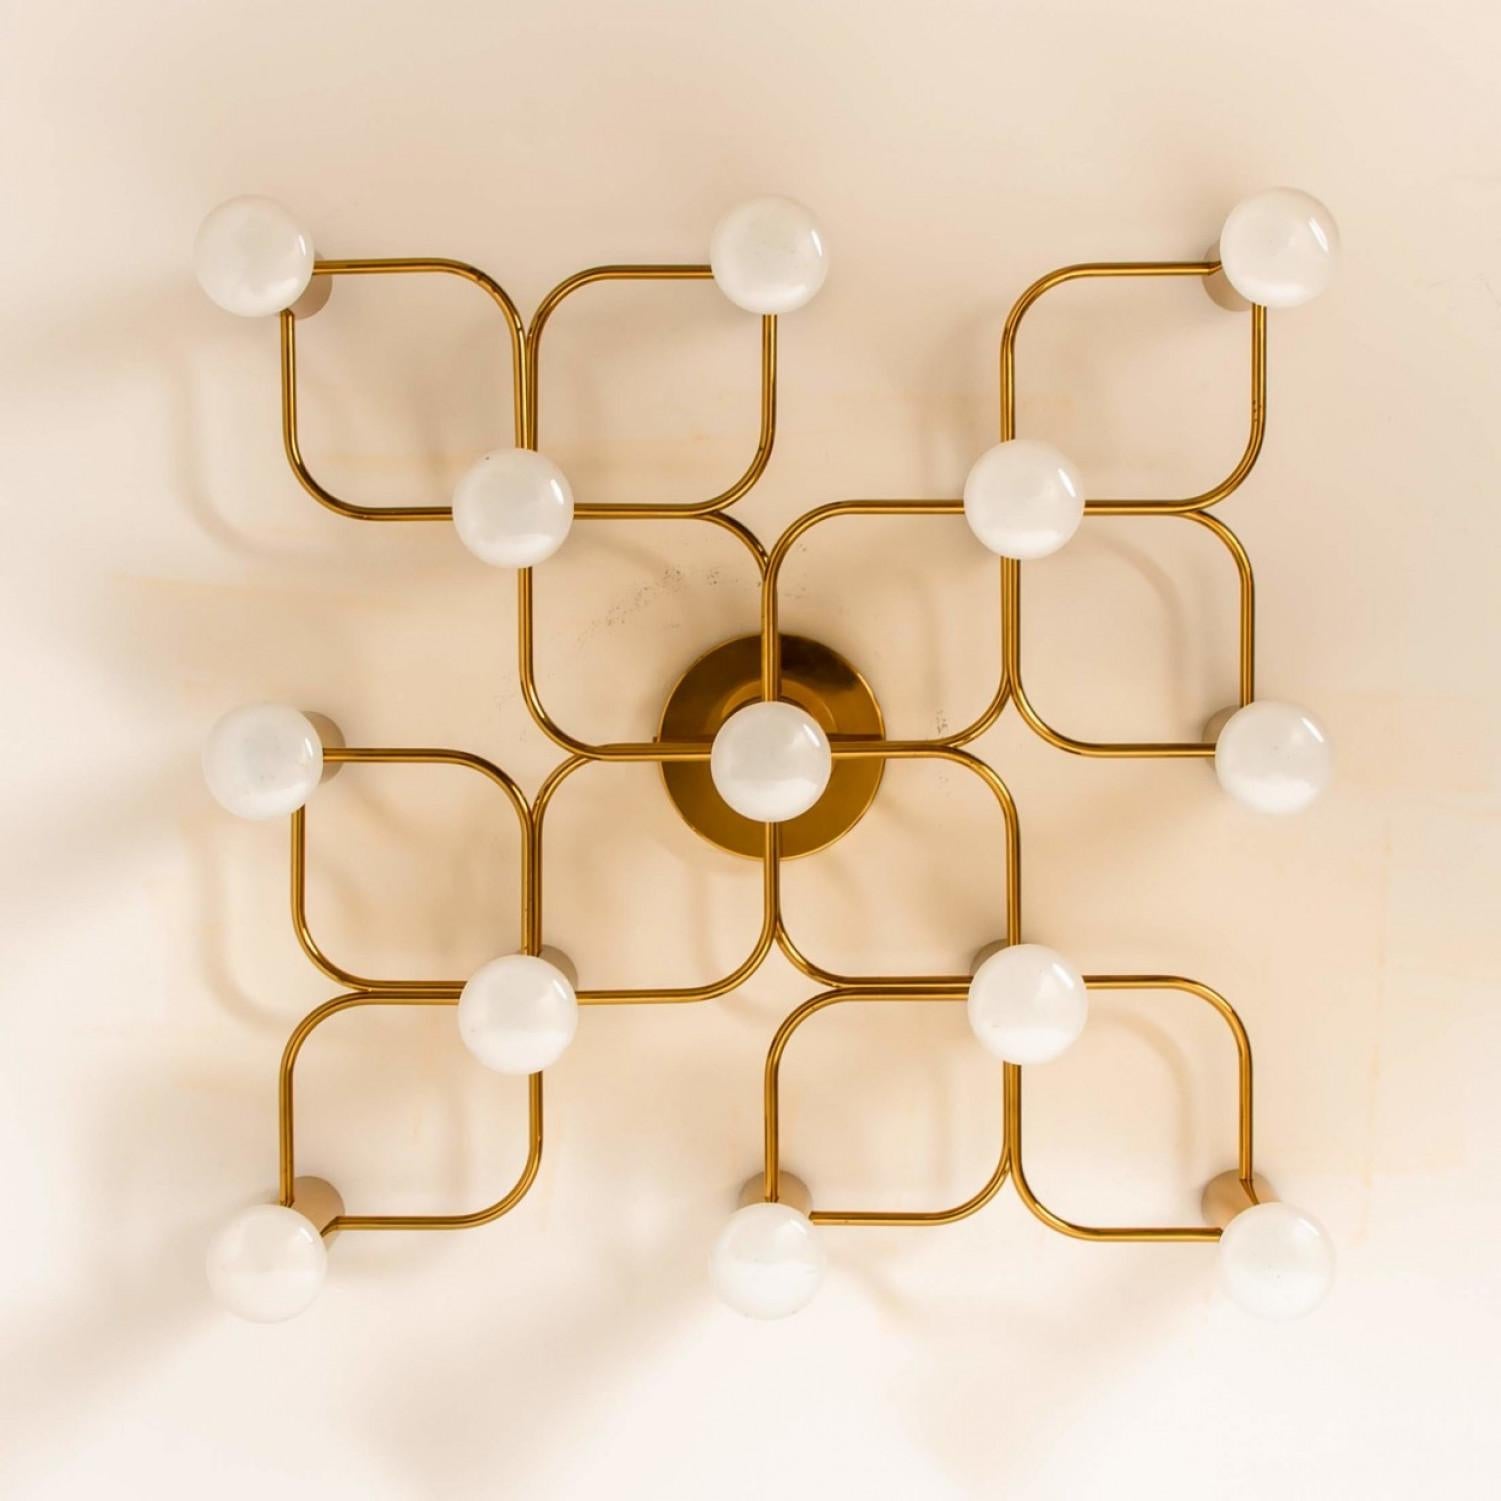 Gorgeous Sciolari style ceiling or wall flush mount by Leola. Made with solid brass, Germany, 1960s.

Can be used as ceiling flush mount or as expressive wall light.

The light fixture requires 13 X E 14 candelabra bulbs, each up to 40 watts.